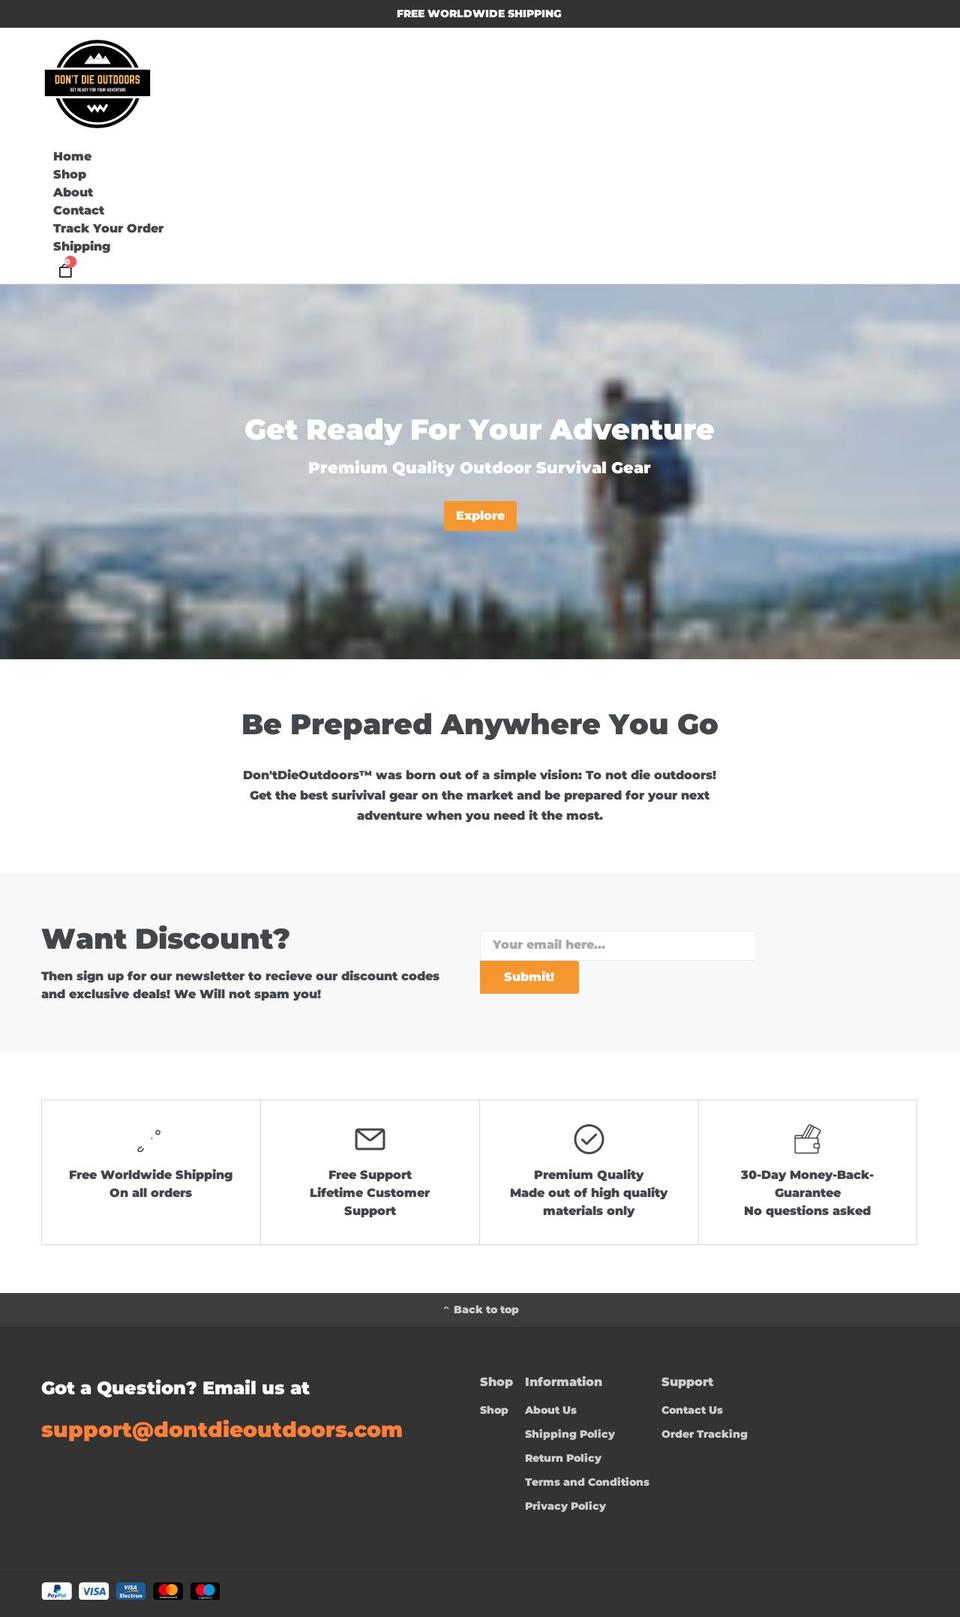 EcomSolid Shopify theme site example dontdieoutdoors.com